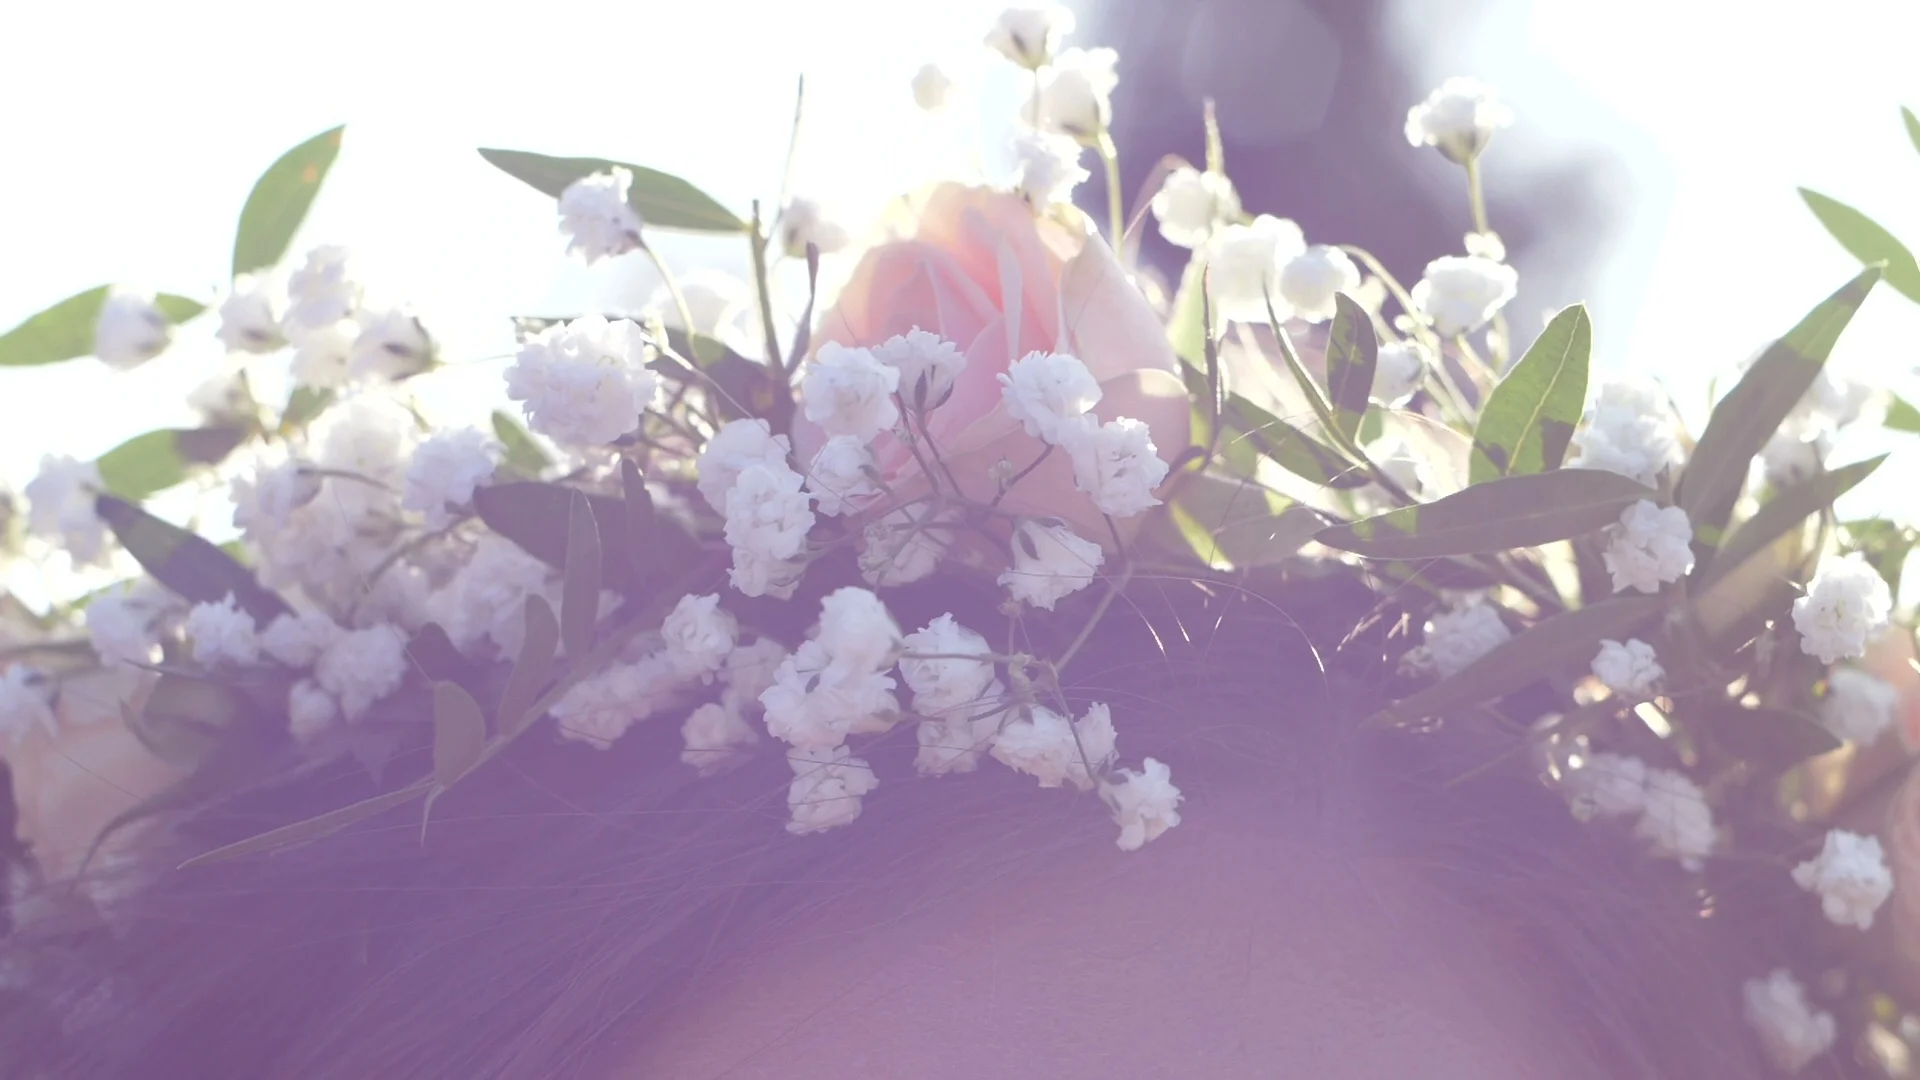 flower crown tumblr photography